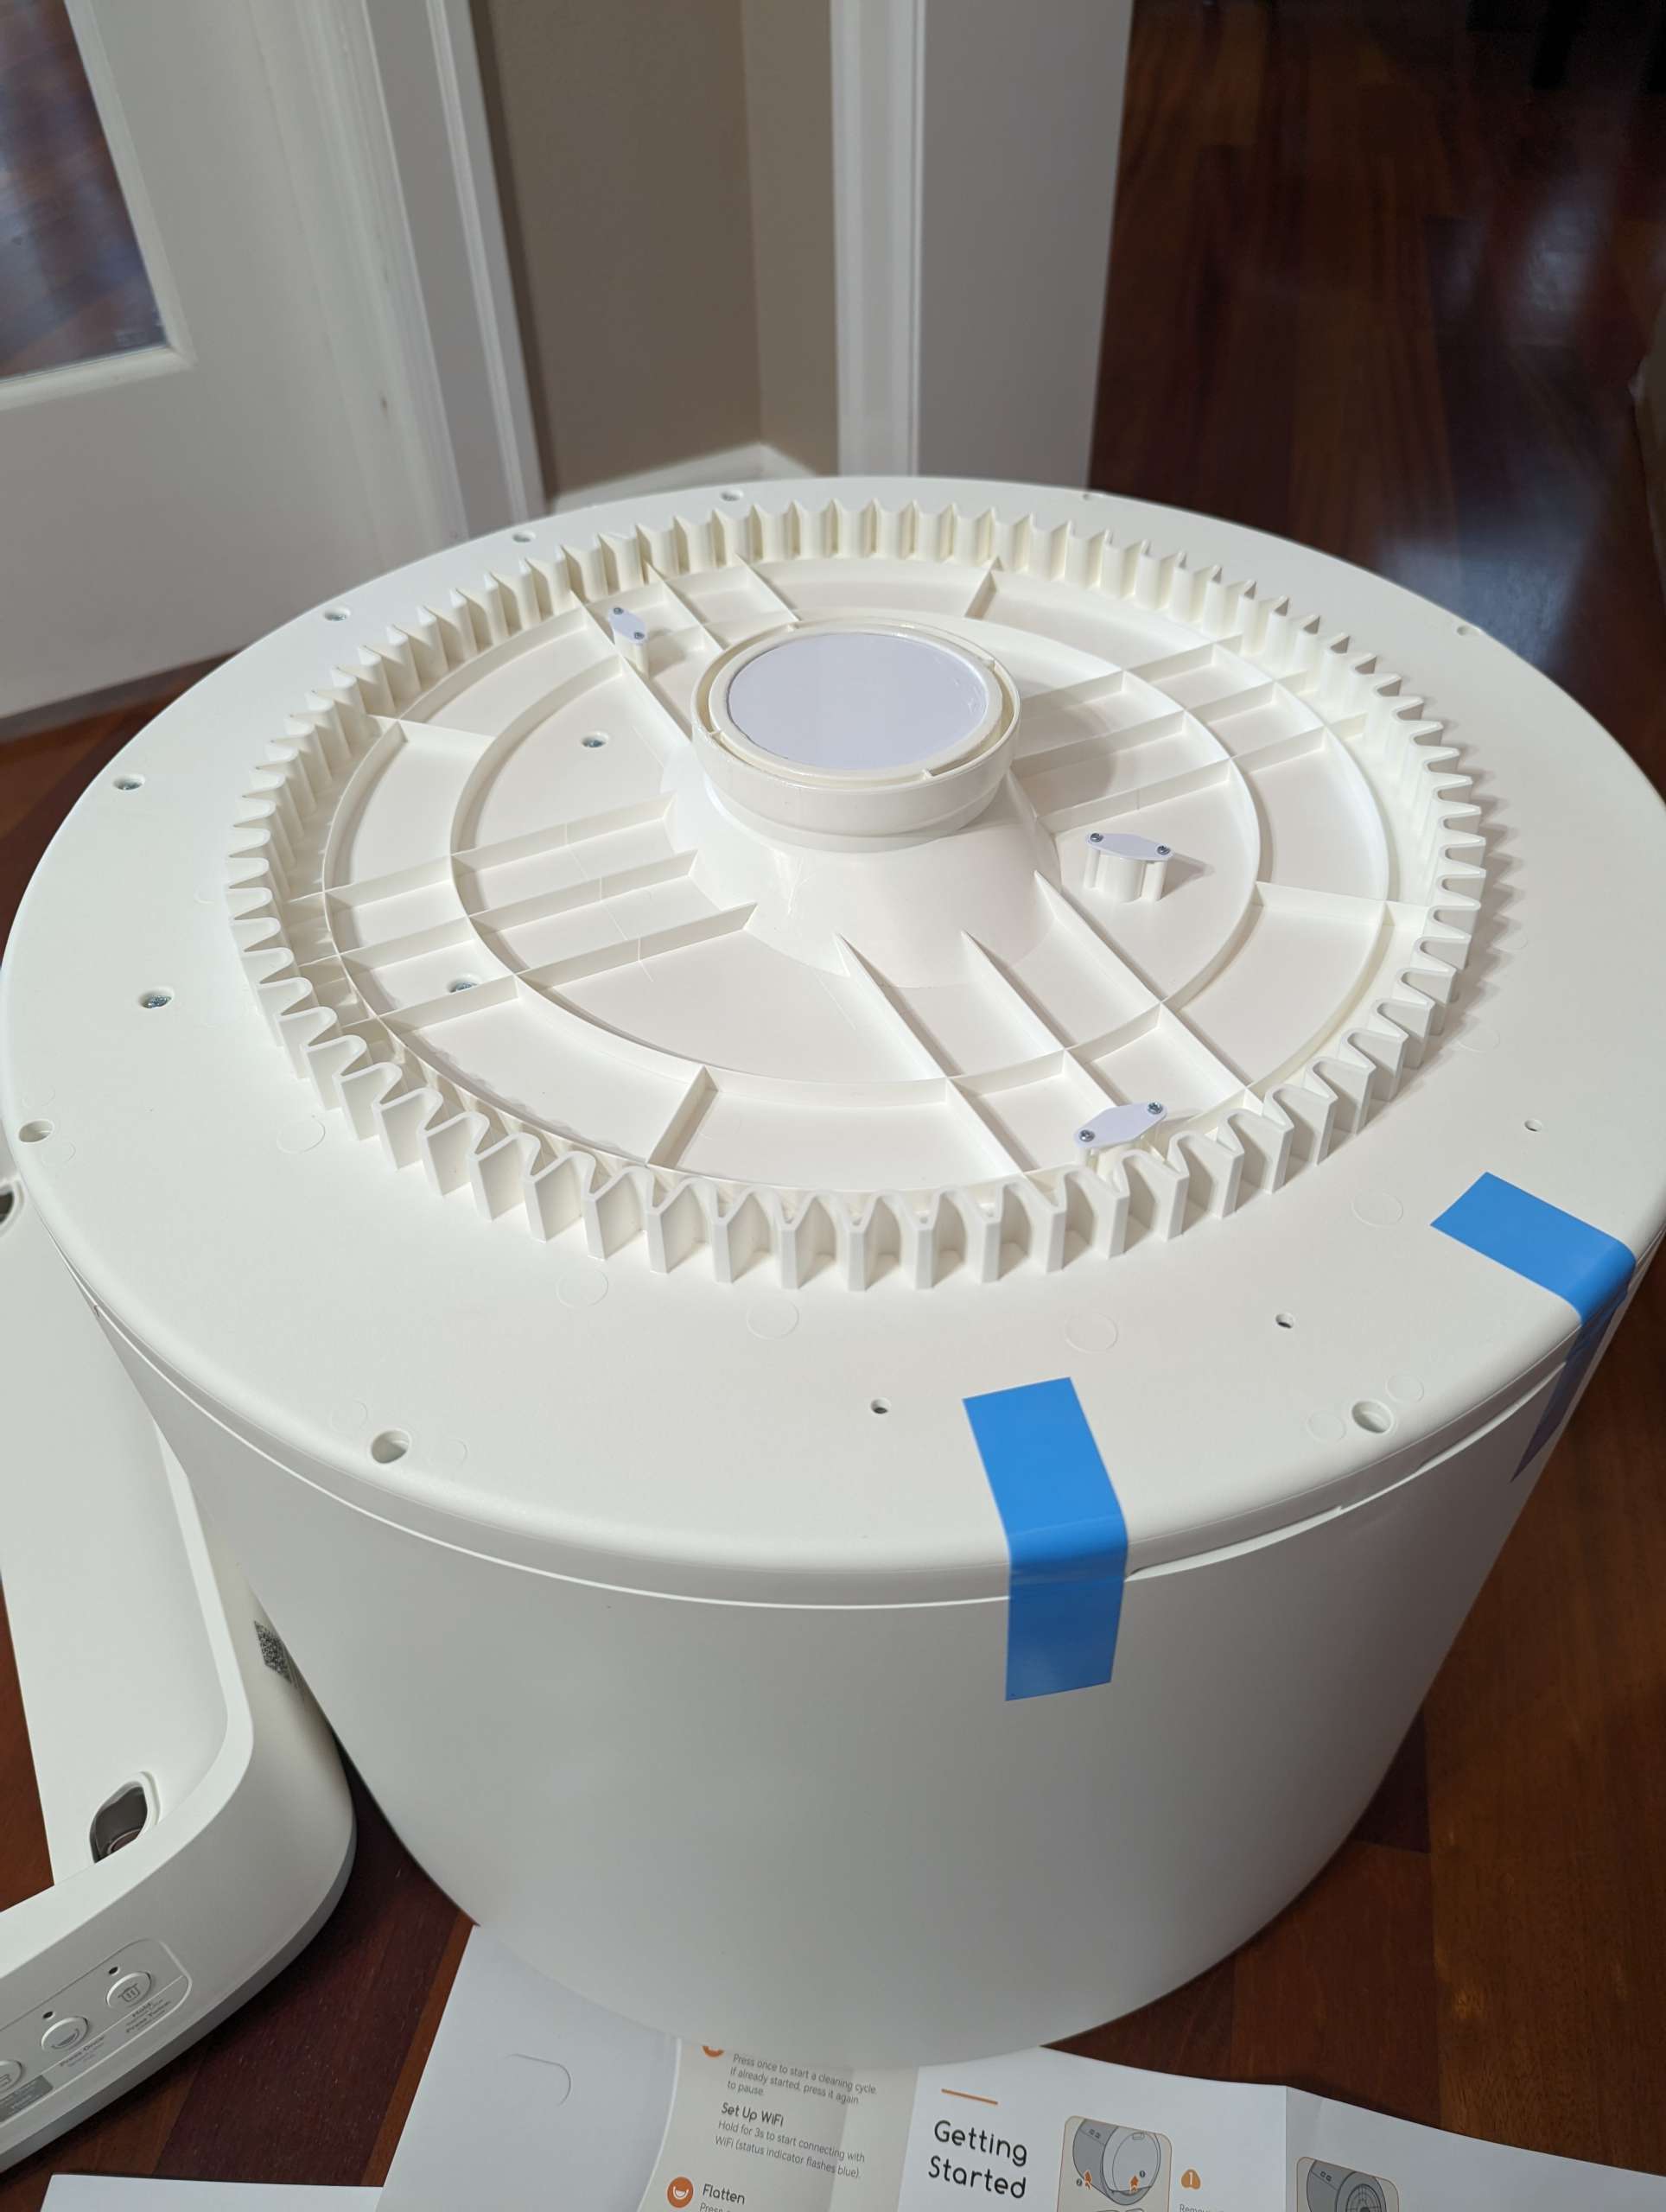 MeoWant Self Cleaning Cat Litter Box review - works great if your cat likes  it - The Gadgeteer